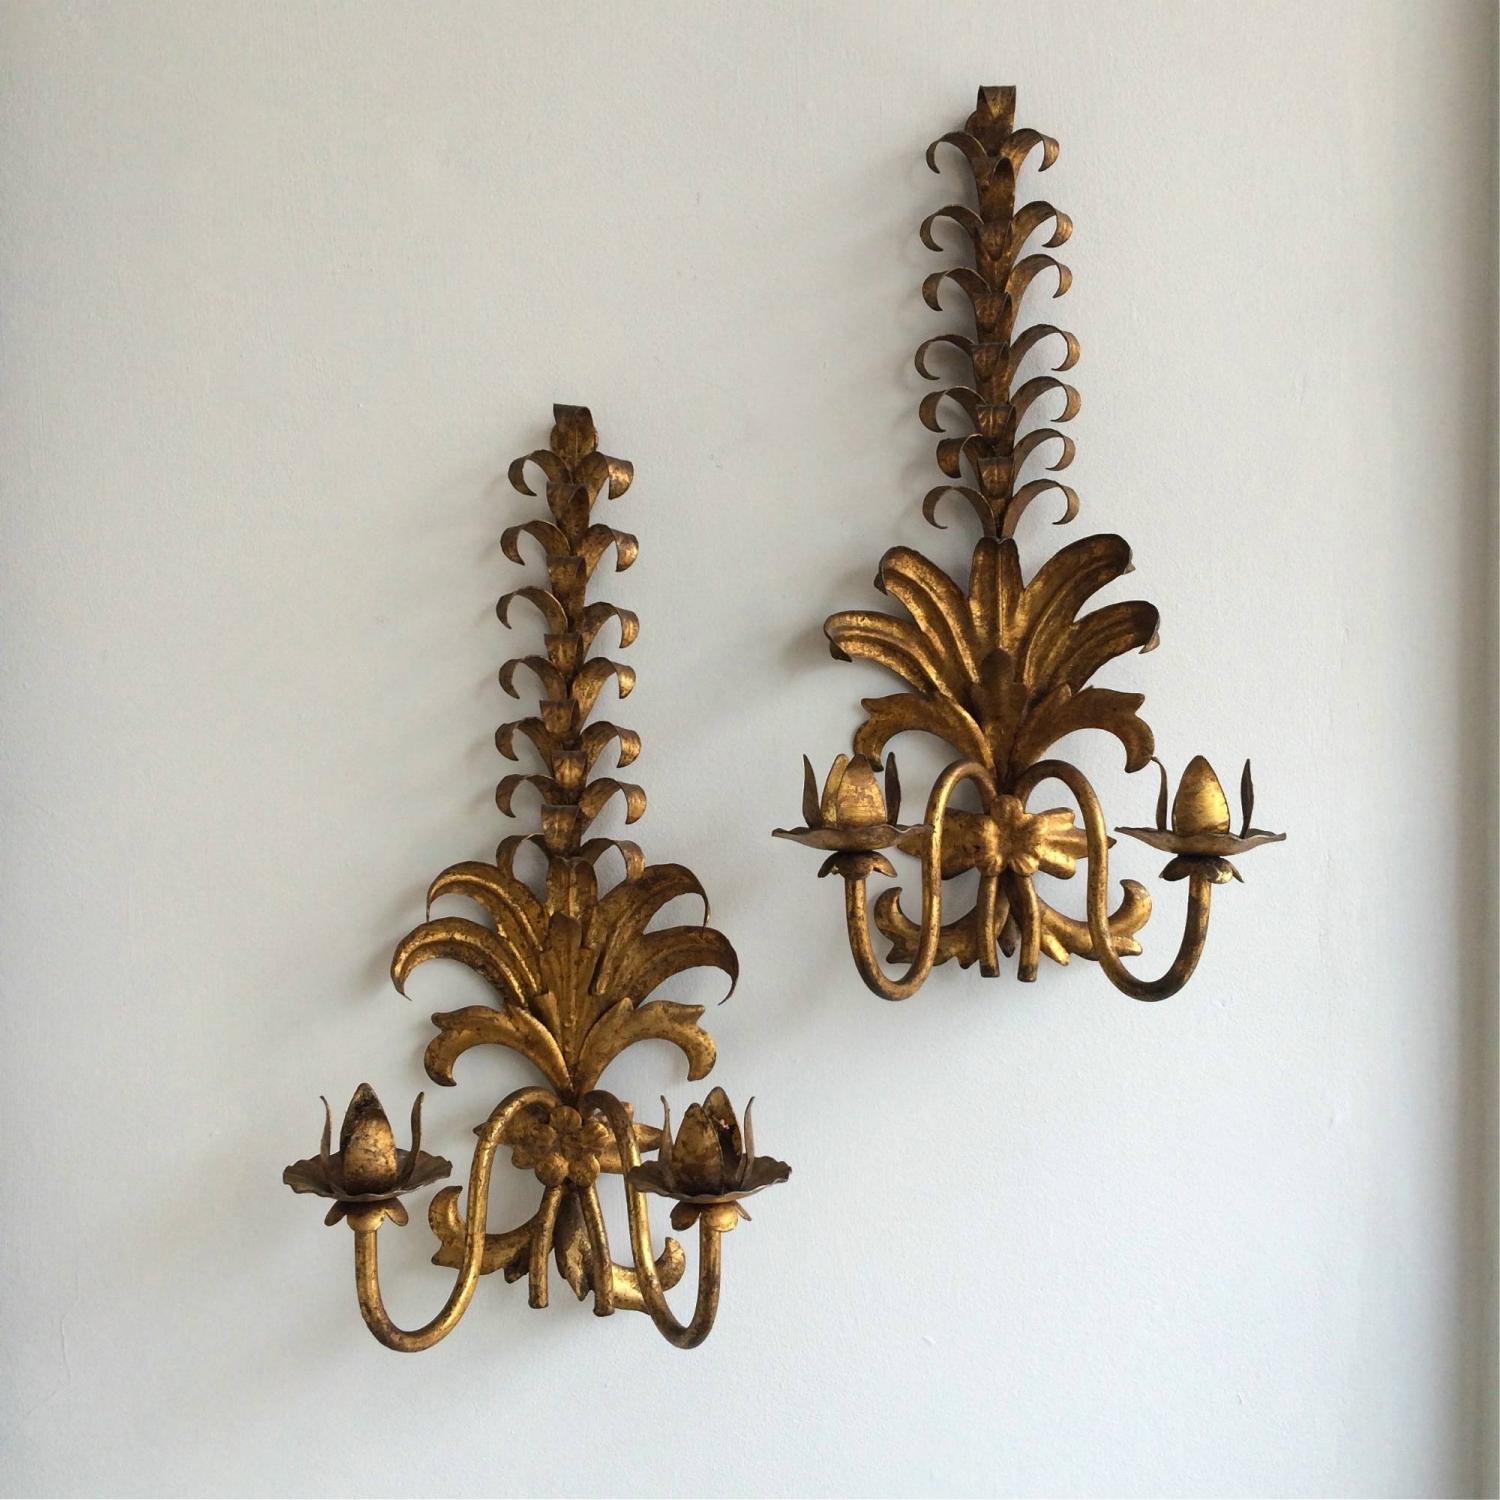 STUNNING FRENCH VINTAGE GILT TOLLE WALL SCONCES